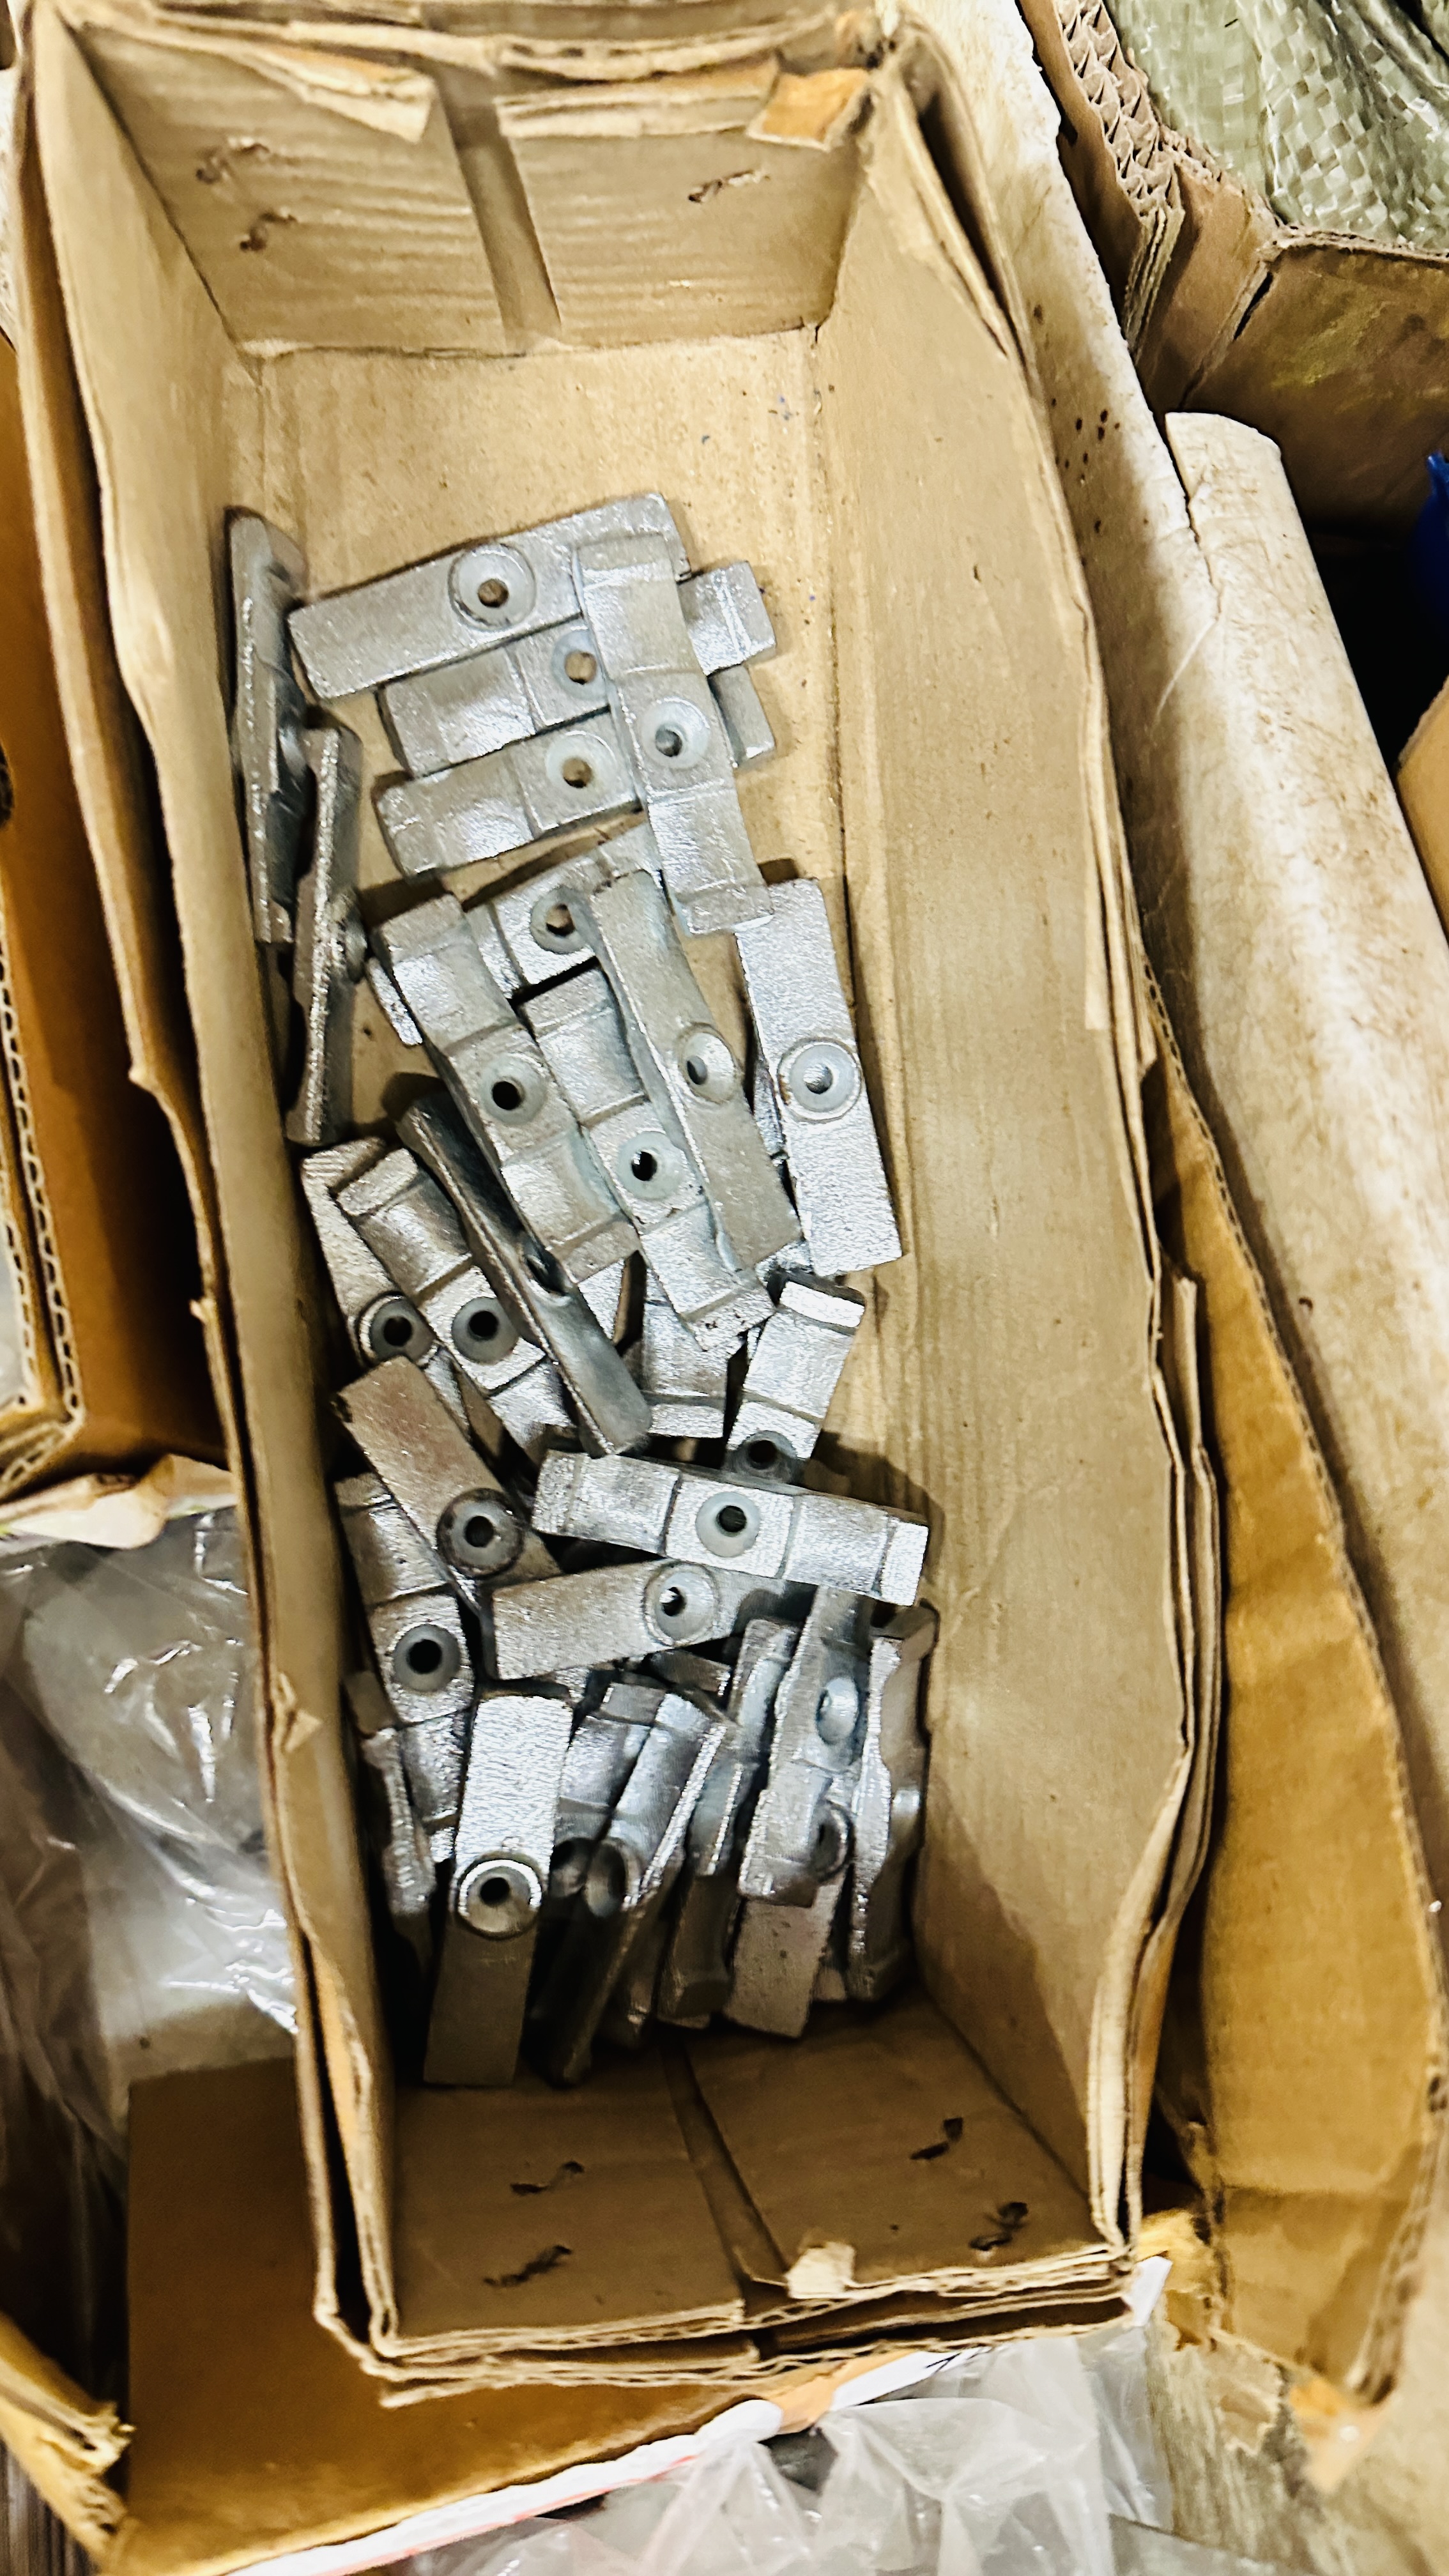 AN EXTENSIVE QUANTITY OF FIXINGS AND FITTINGS, DOOR FITTINGS & FURNITURE LOCKS, LATCH LOCKS, - Image 17 of 28